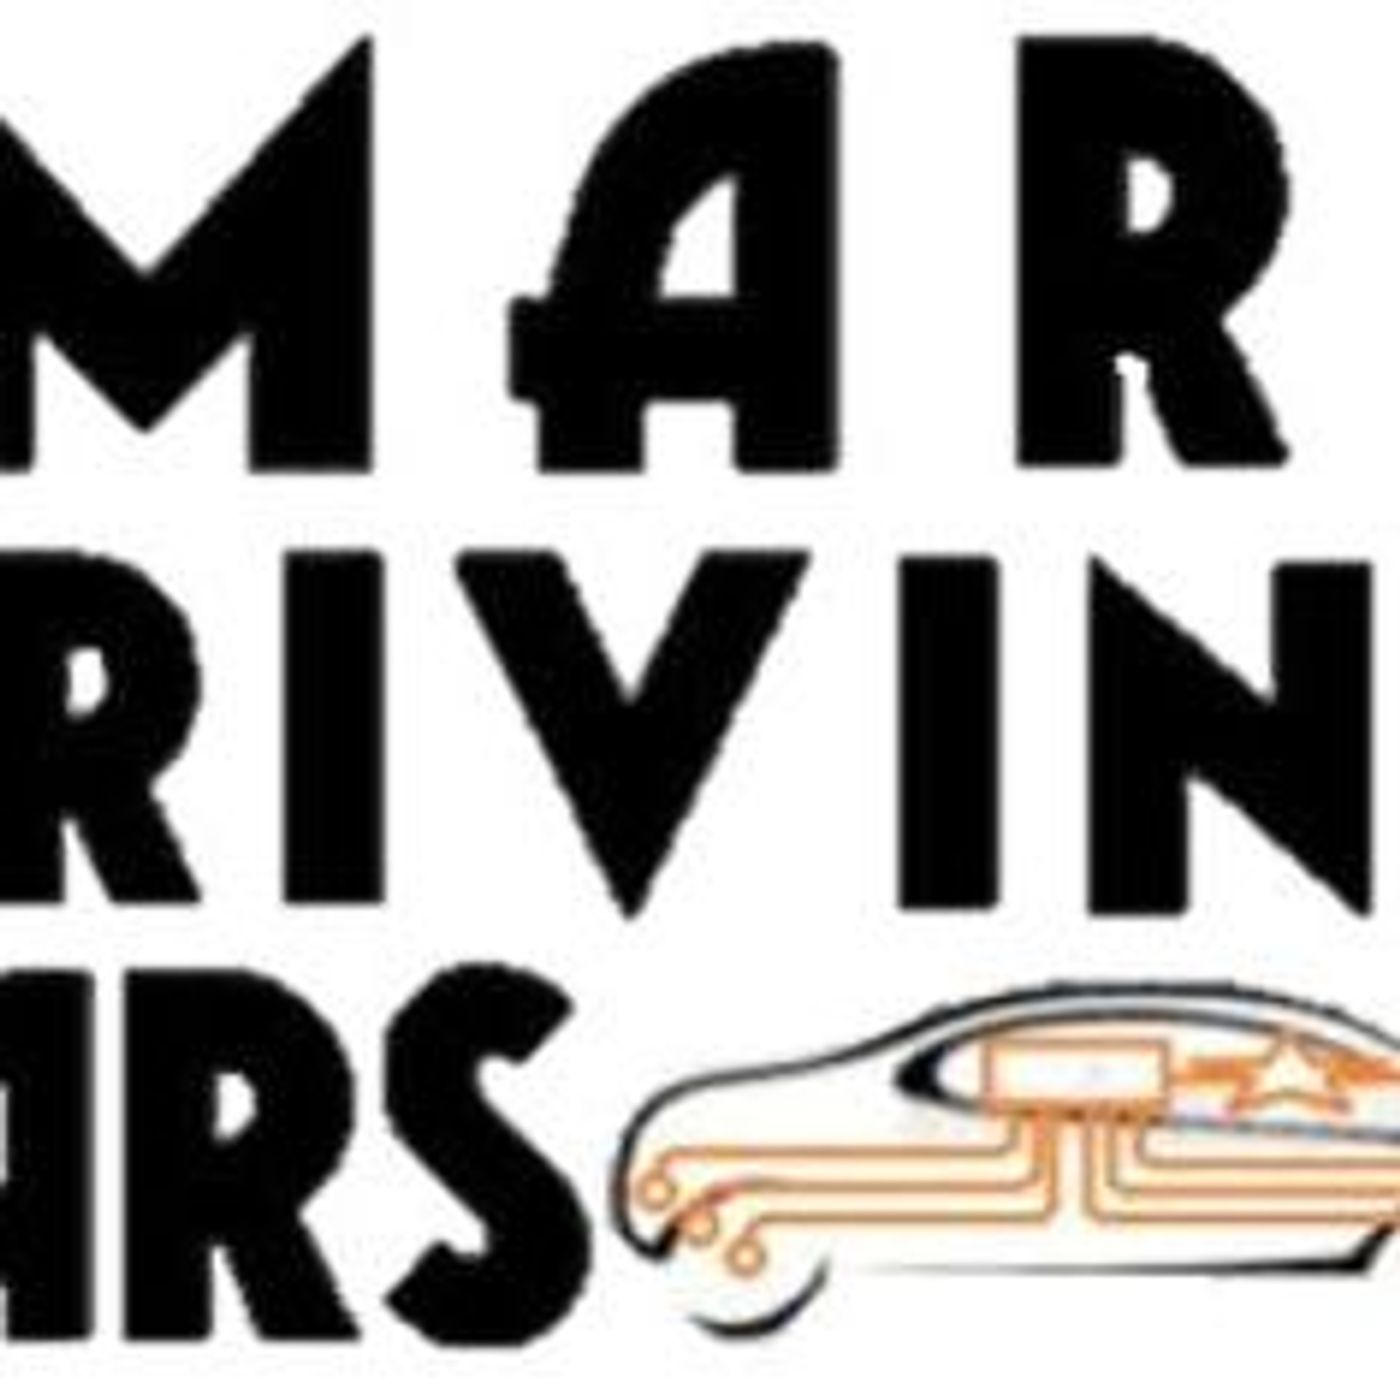 Smart Driving Cars Episode 40